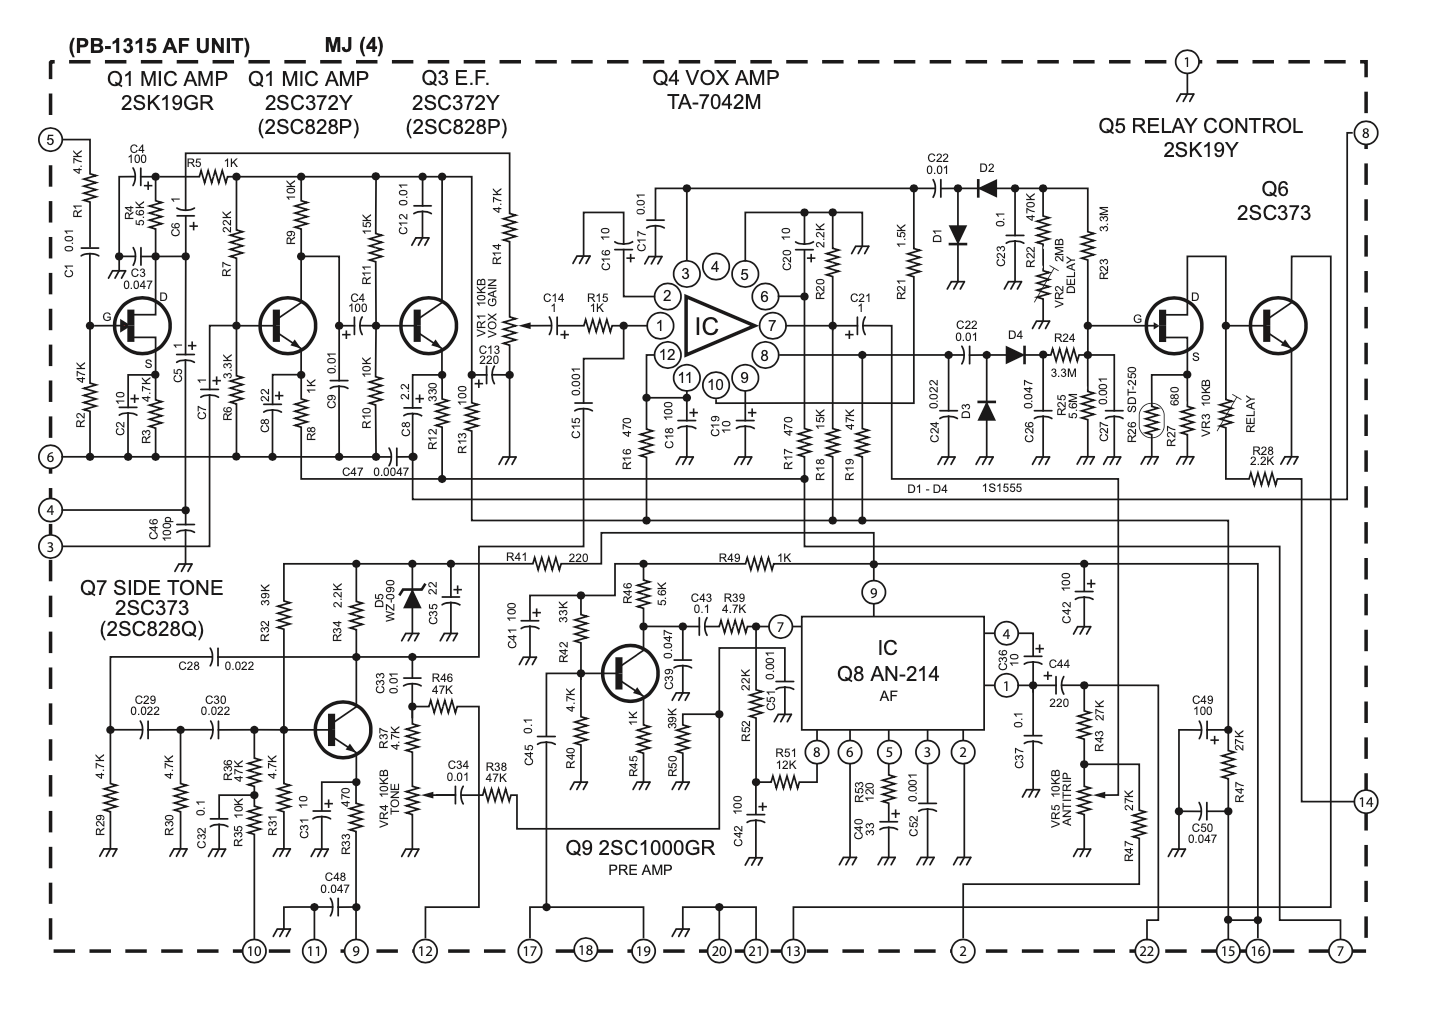 Yaesu FT-101 - Schematic of PB-1315 Audio Module that was fitted in Early FT-101B's